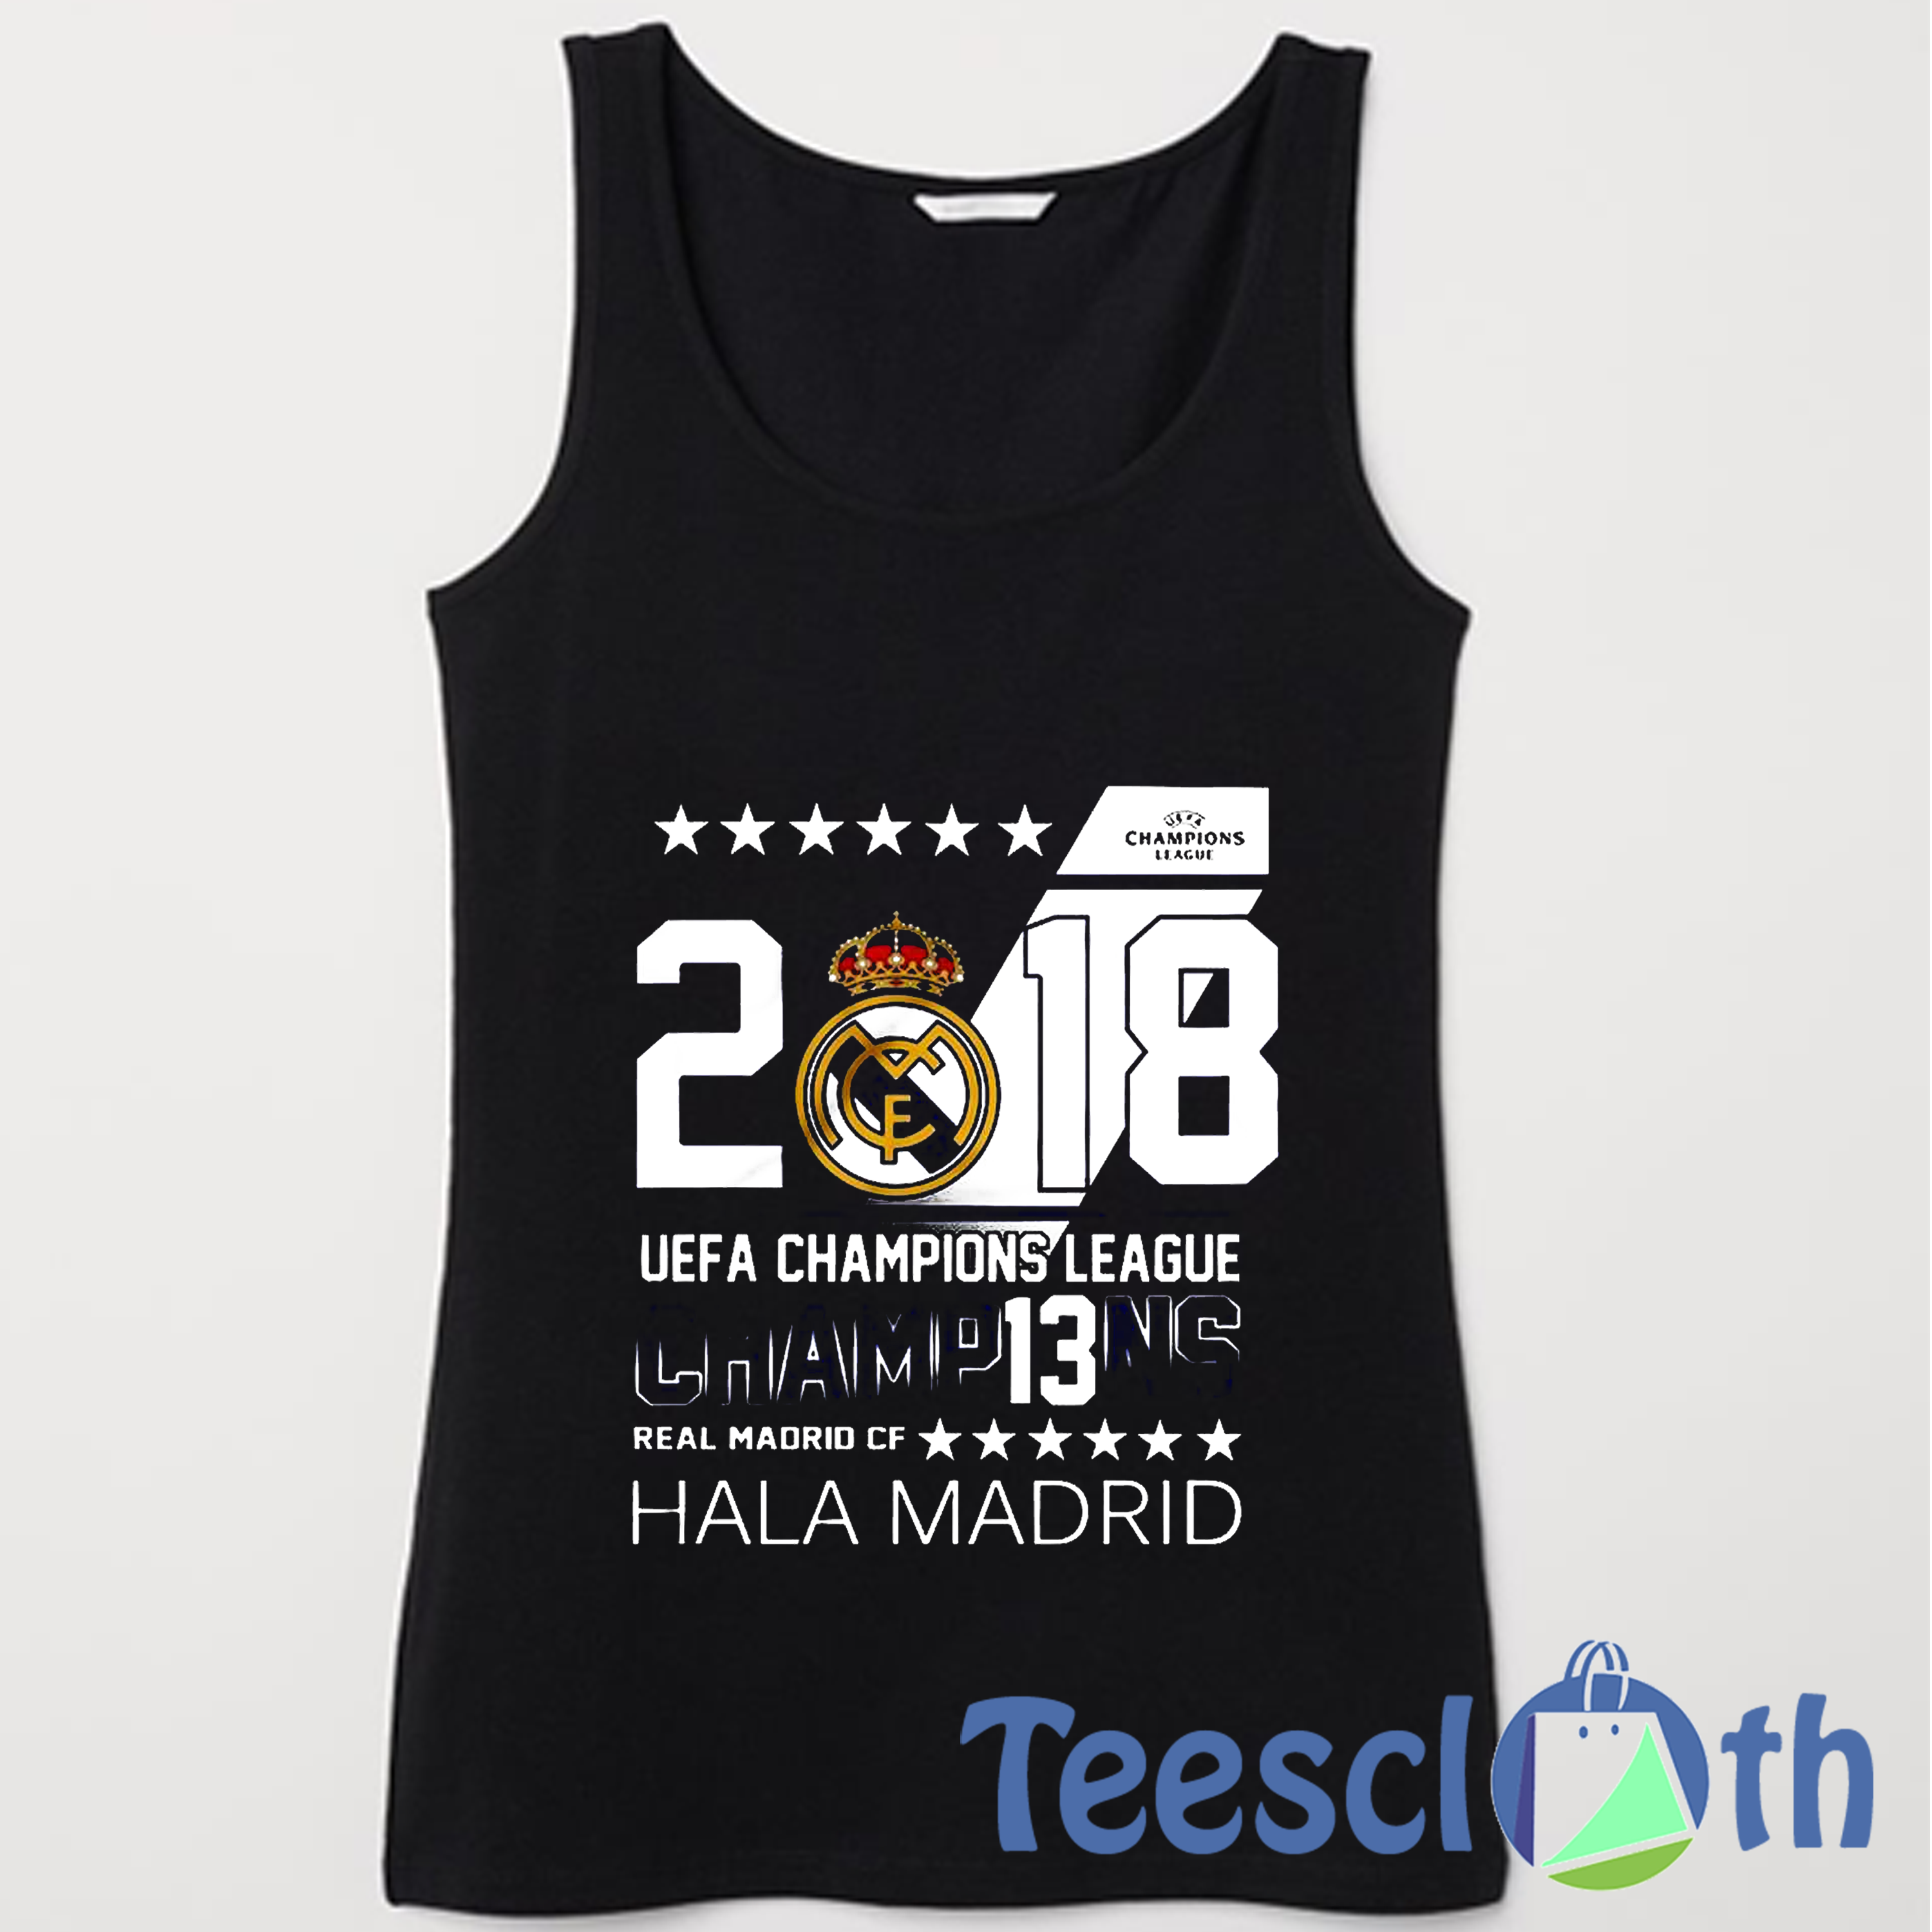 Real Tank Top Men And Women S to